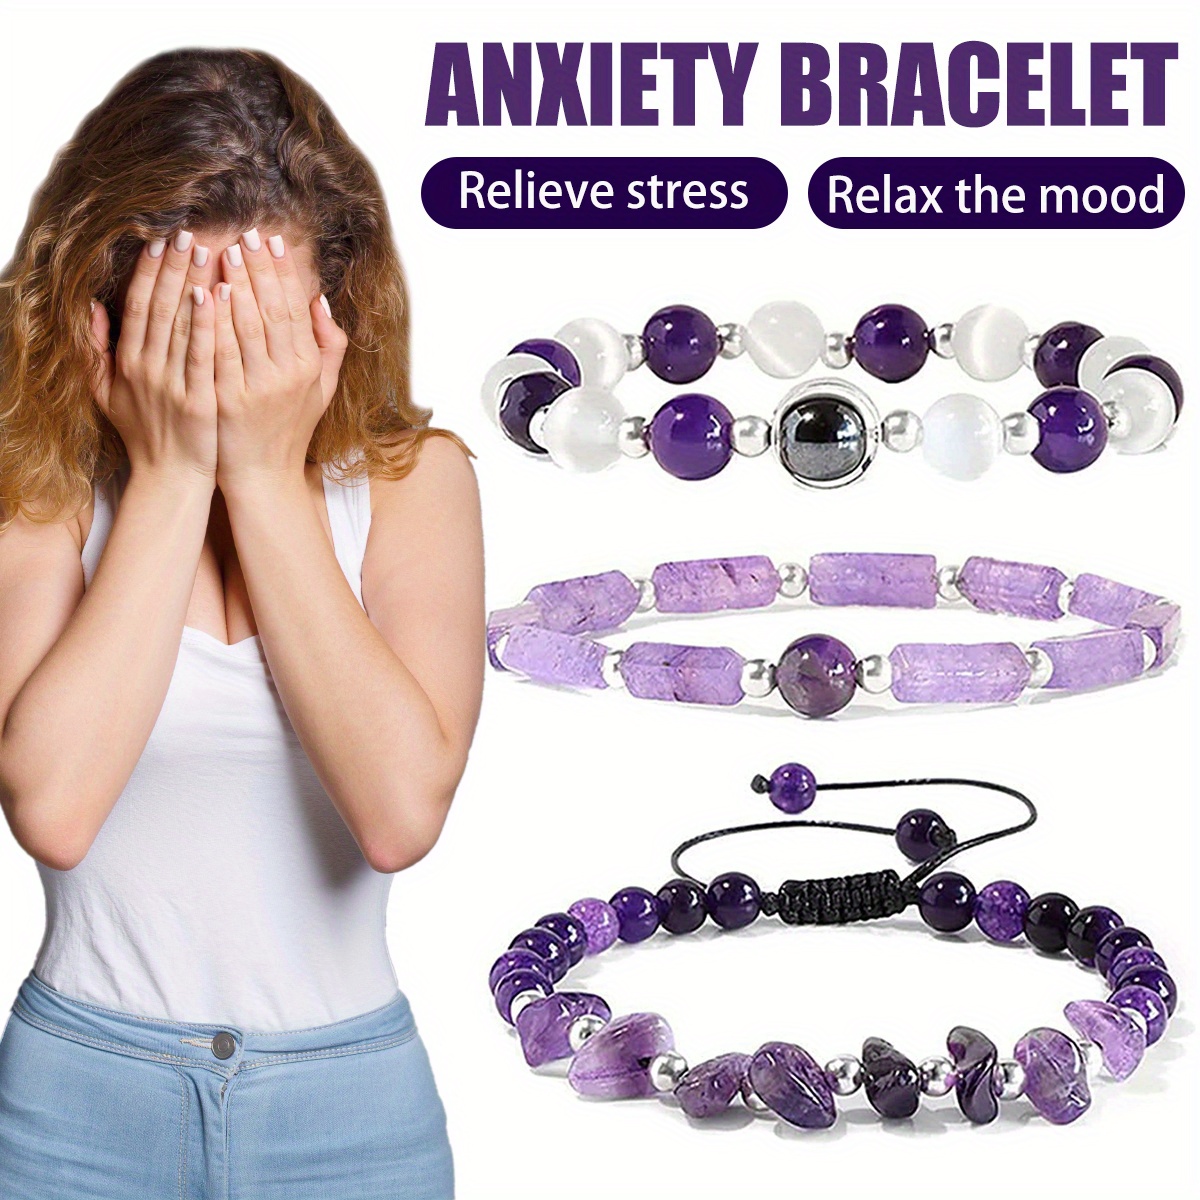 Soothing Anxiety Bracelet